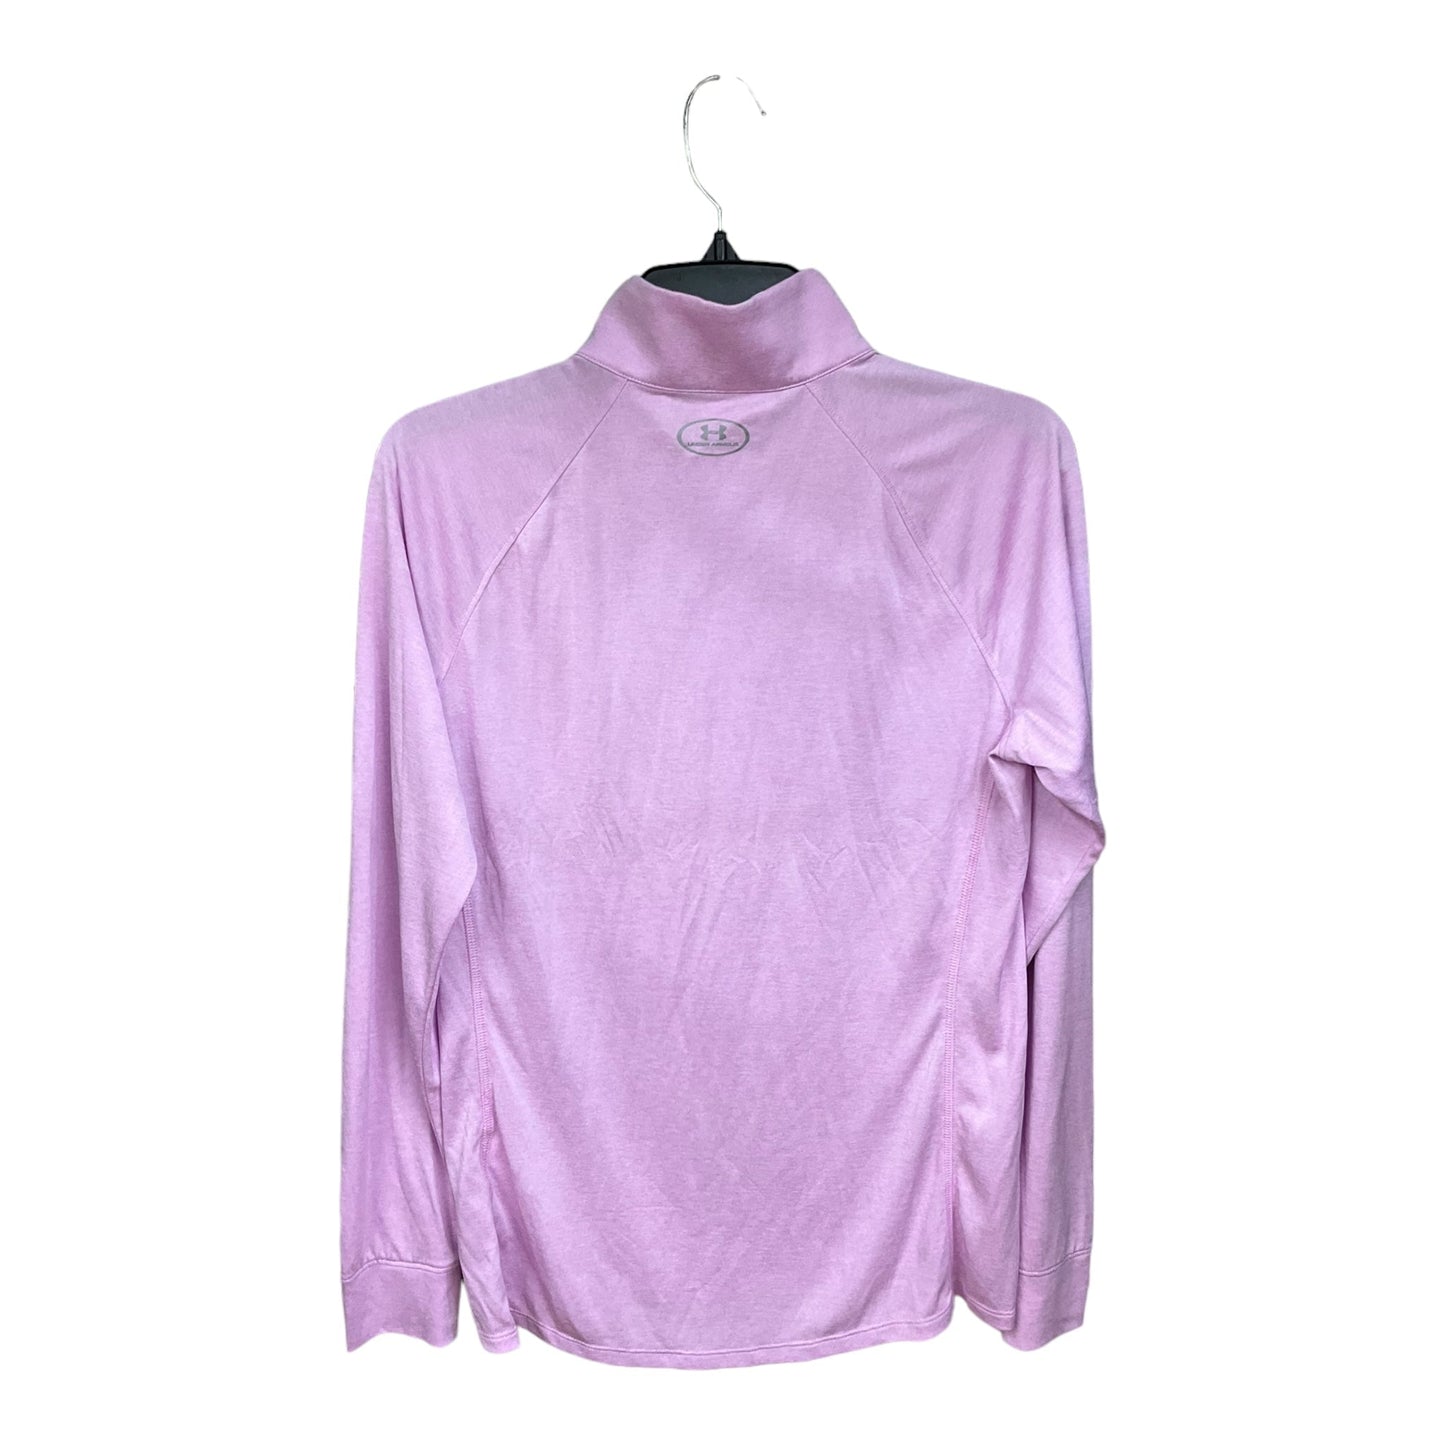 Pink Athletic Top Long Sleeve Collar Adidas, Size L